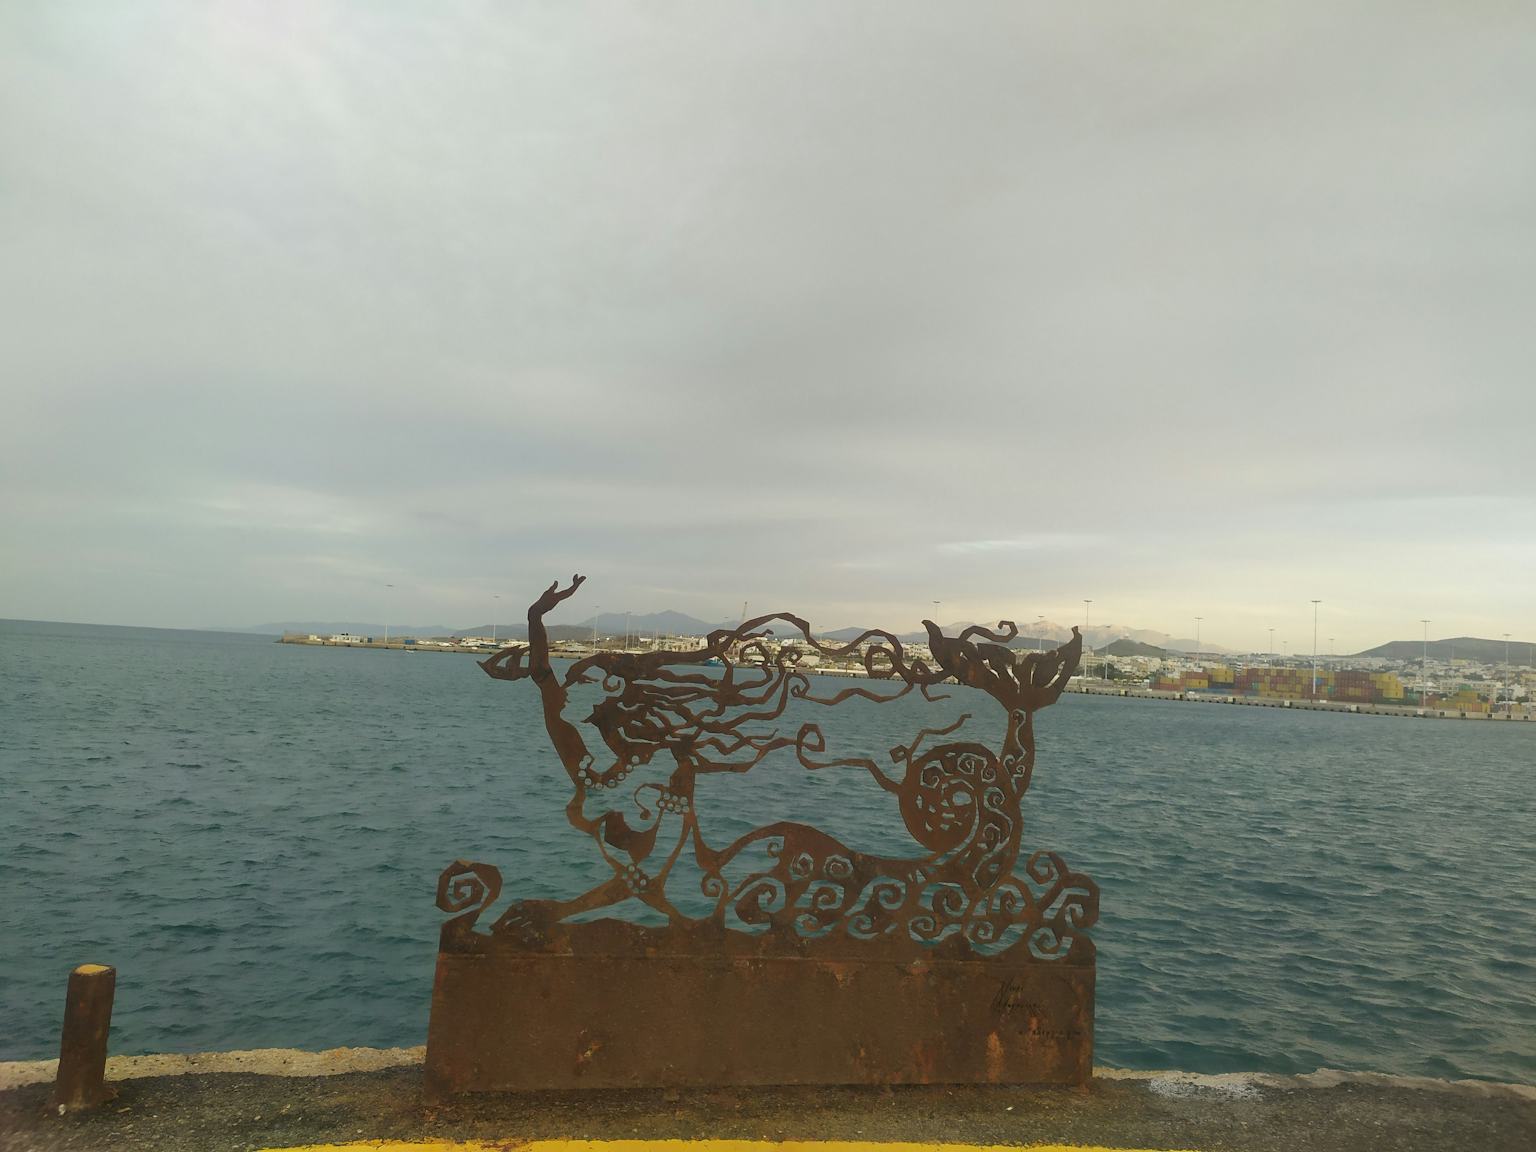 A Mermaid Welcomes You at the Heraklion Port!